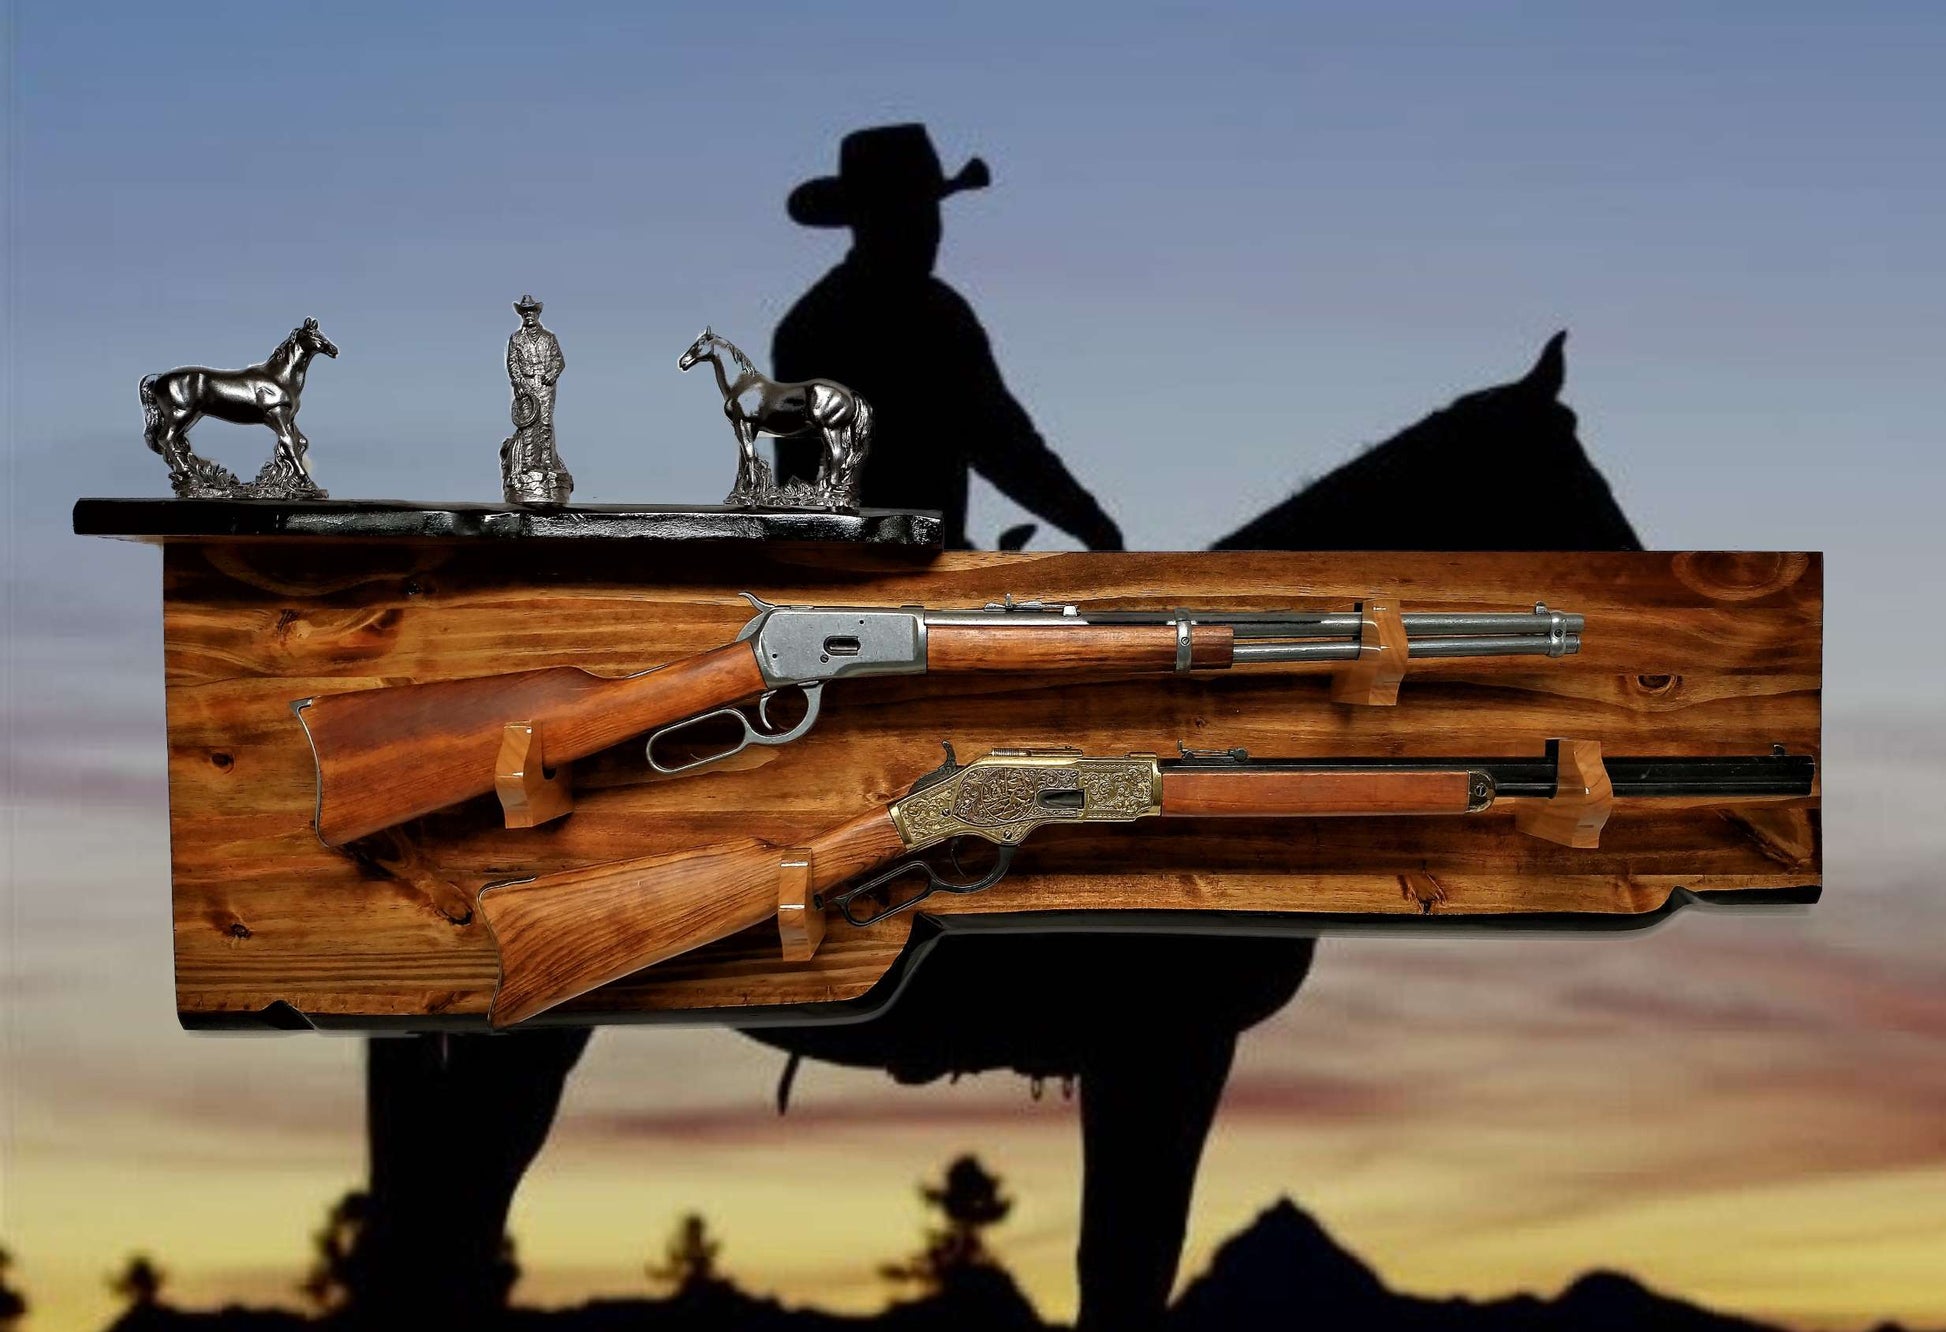 Walker Wood Gifts Gun Display RUSTIC 2 Place Lever Action Shelf Gun Display Hunting Gift Lodge Cabin Cottage Décor